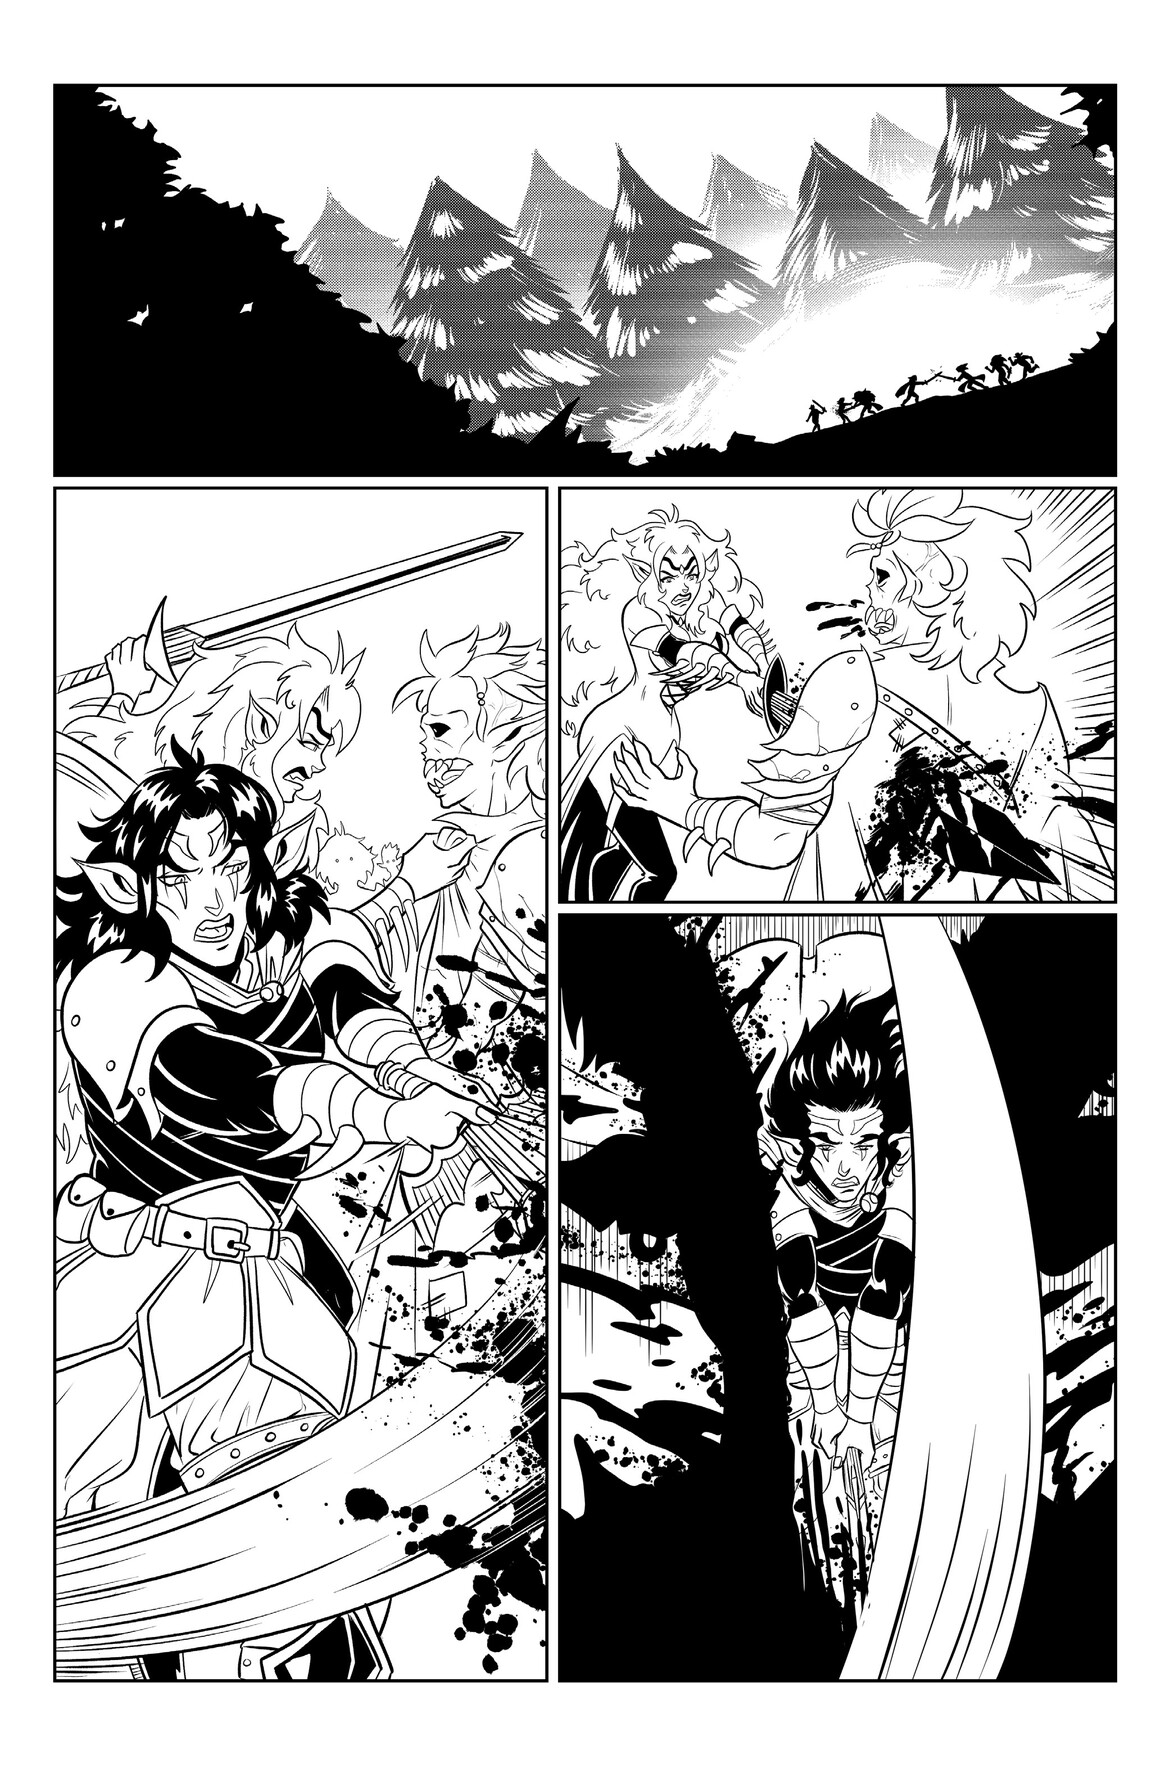 Rayne of Ages issue 1 page 1